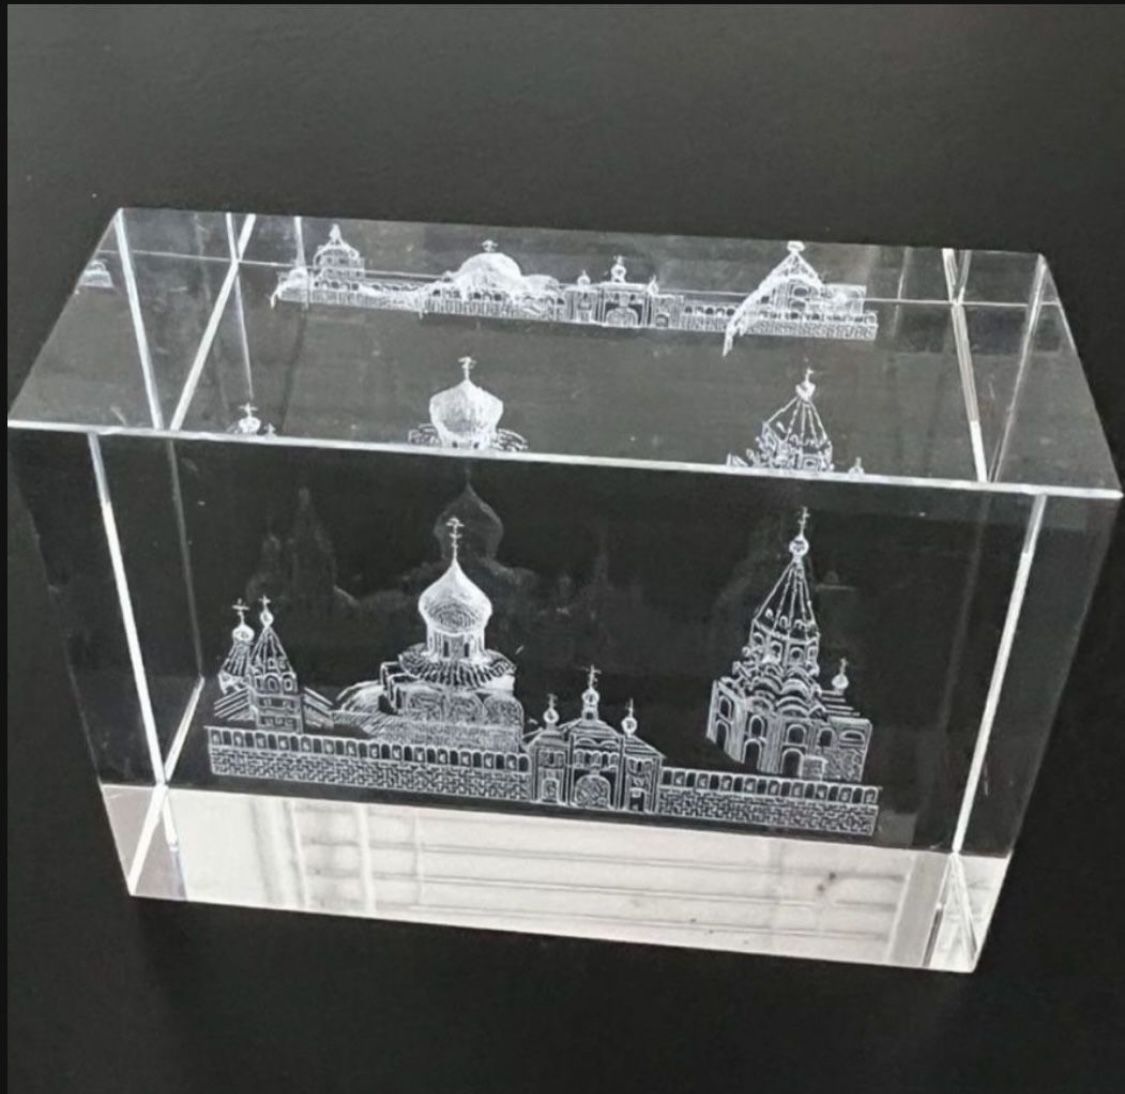 Vintage 3D Laser Crystal Engraving For Laser Building church Cube Mini Blocks 3d Laser Crystal Paperweight  In great condition  Approx 2.5” x 3”